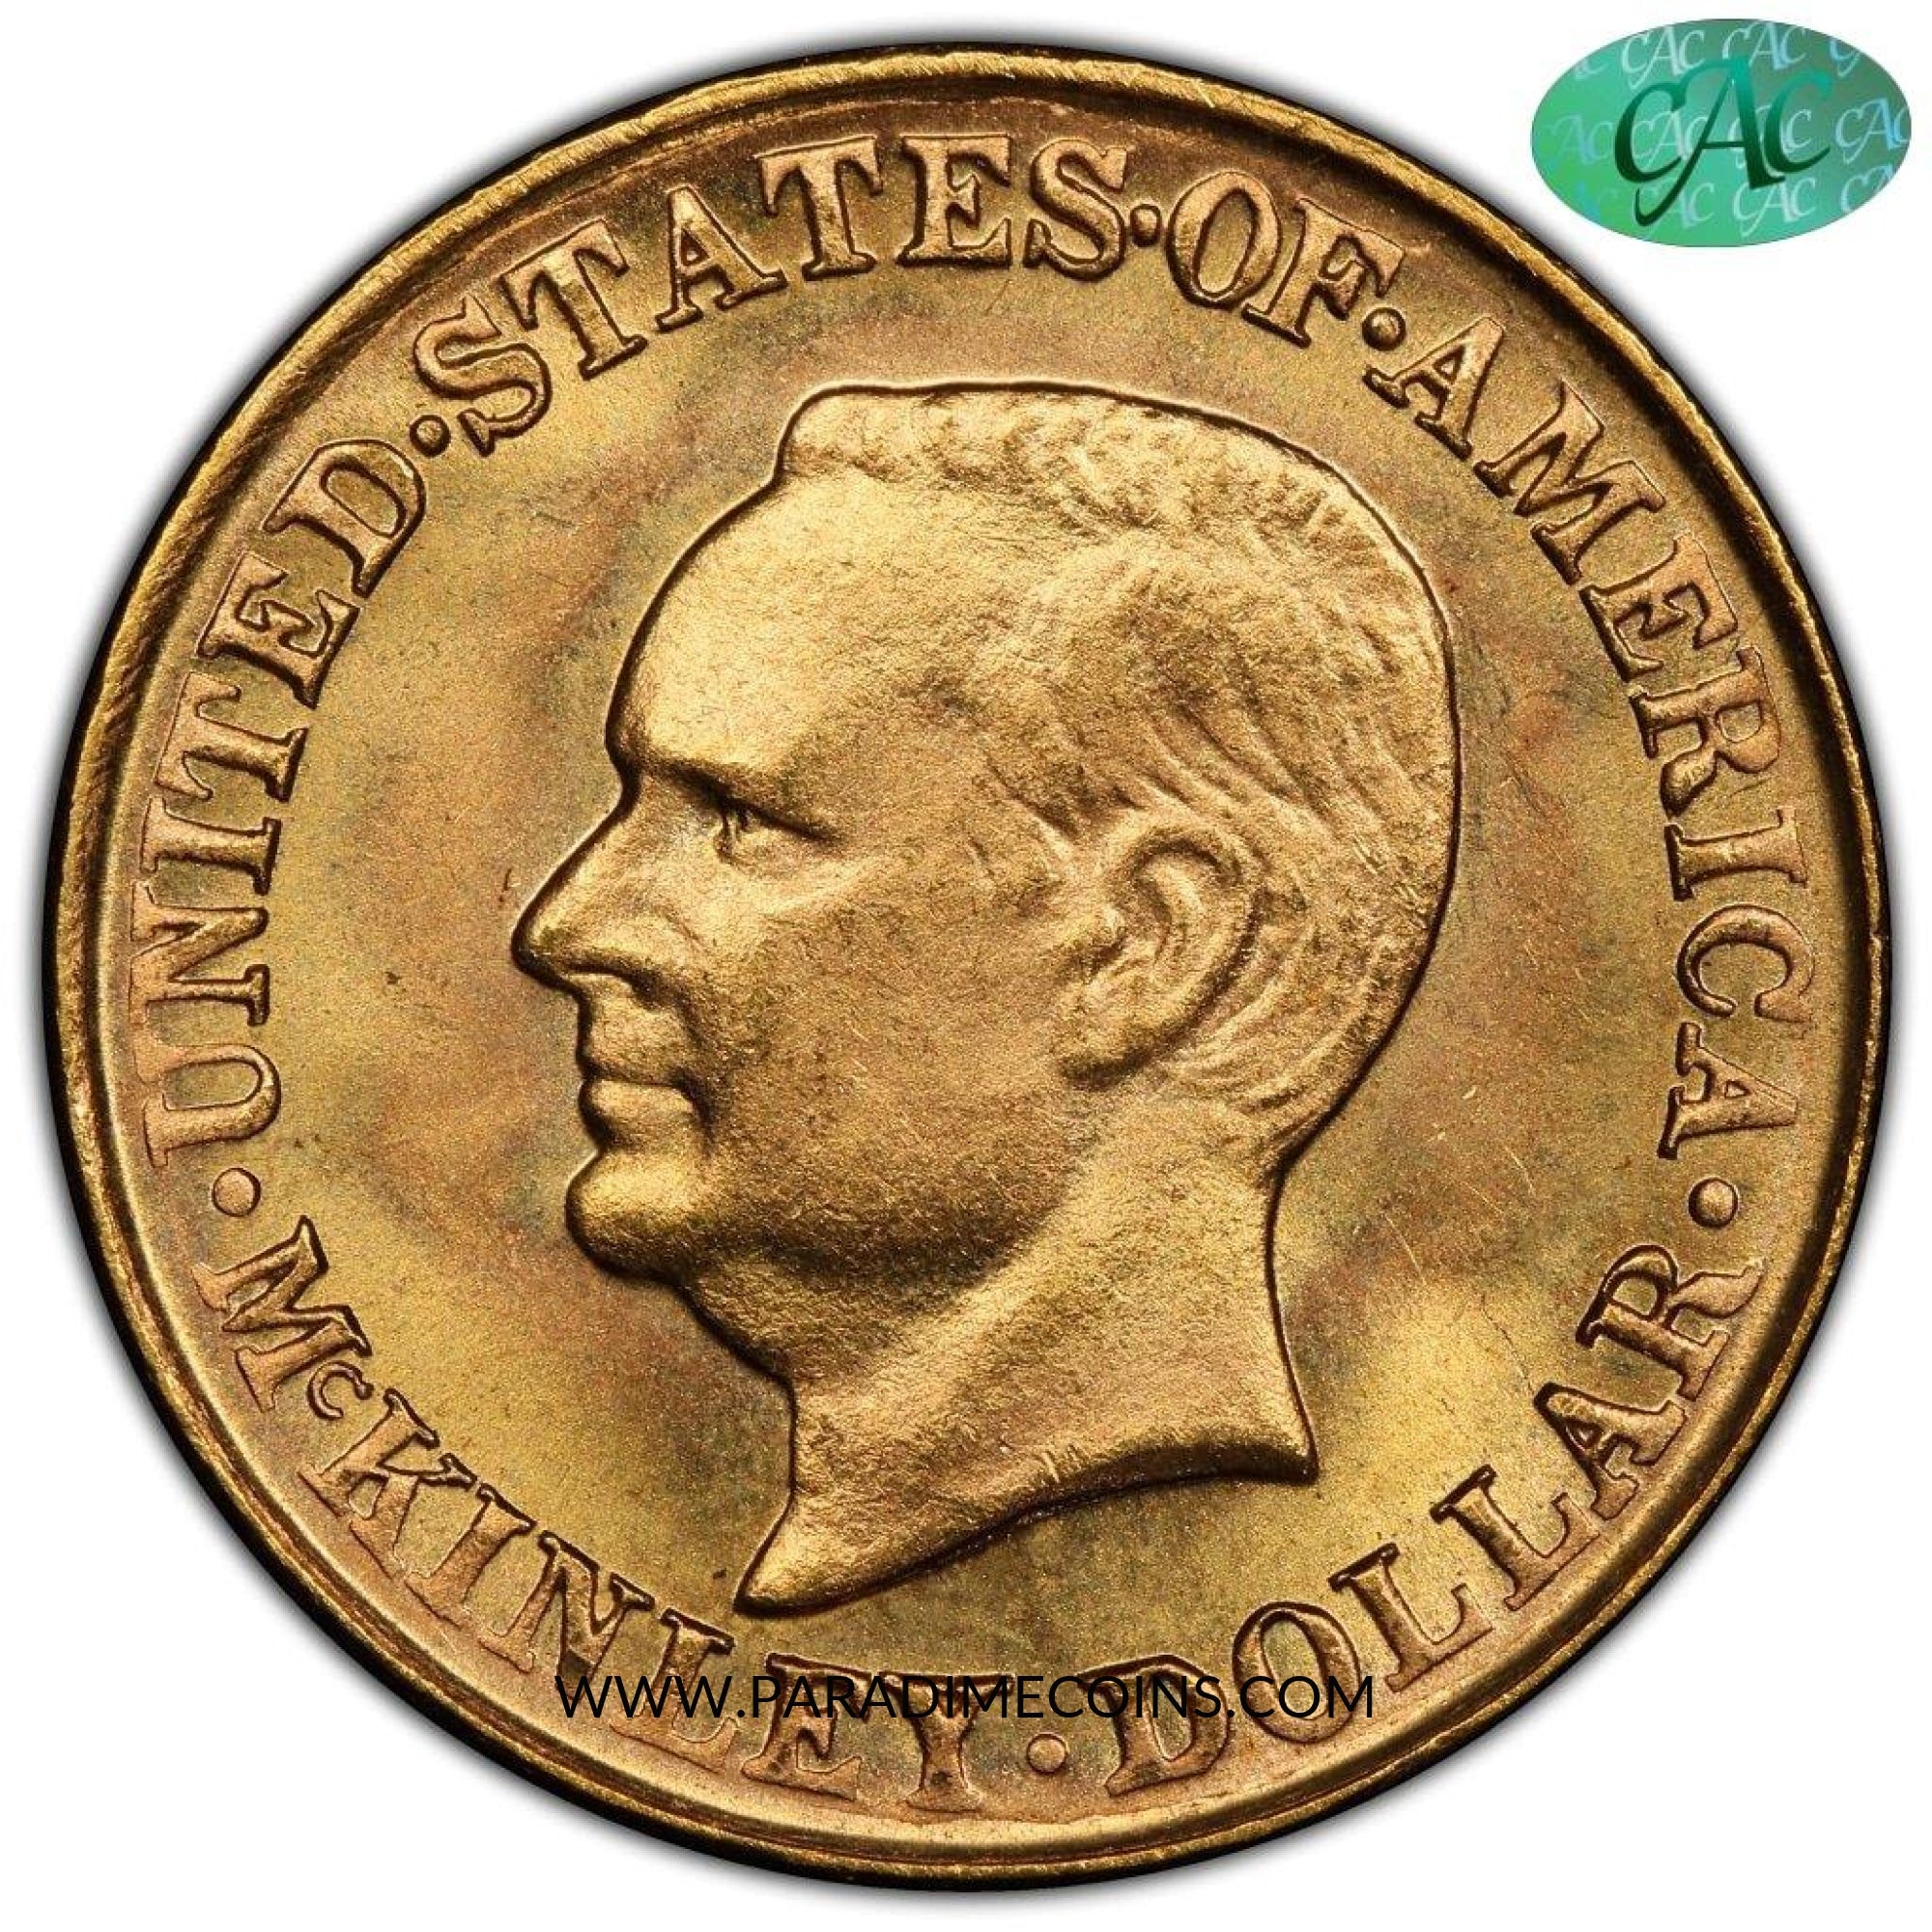 1917 G$1 McKinley MS66 PCGS CAC - Paradime Coins | PCGS NGC CACG CAC Rare US Numismatic Coins For Sale